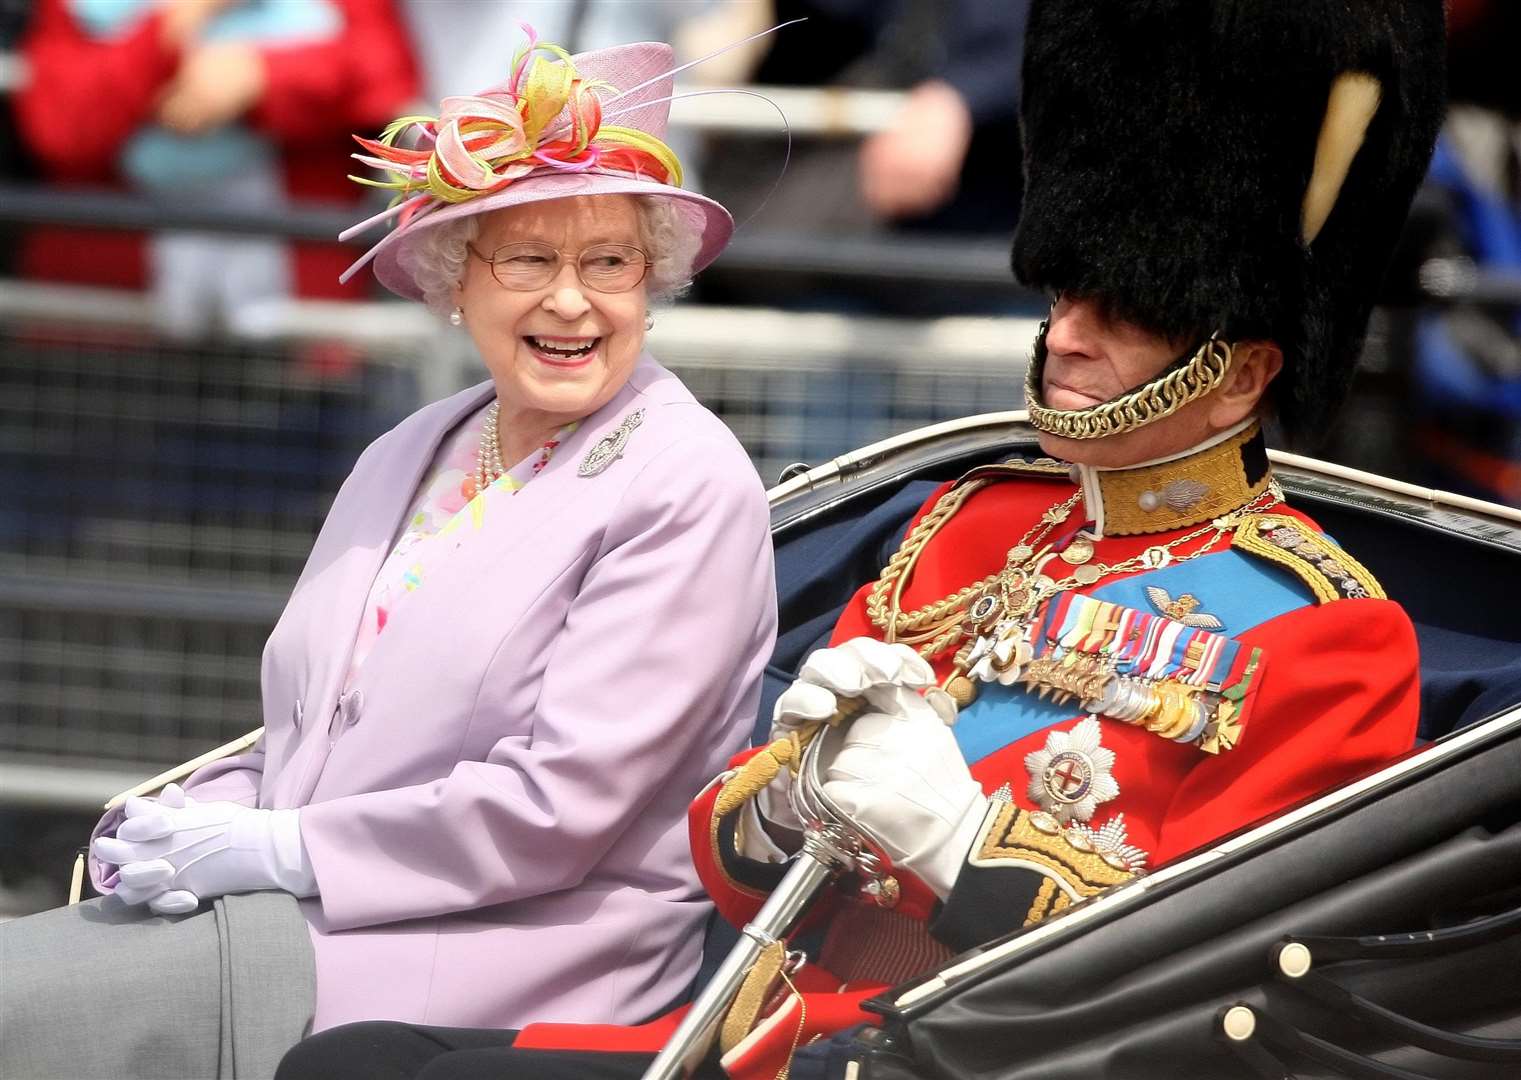 The Queen and Philip return to Buckingham Palace following Trooping the Colour in 2010 (Dominic Lipinski/PA)